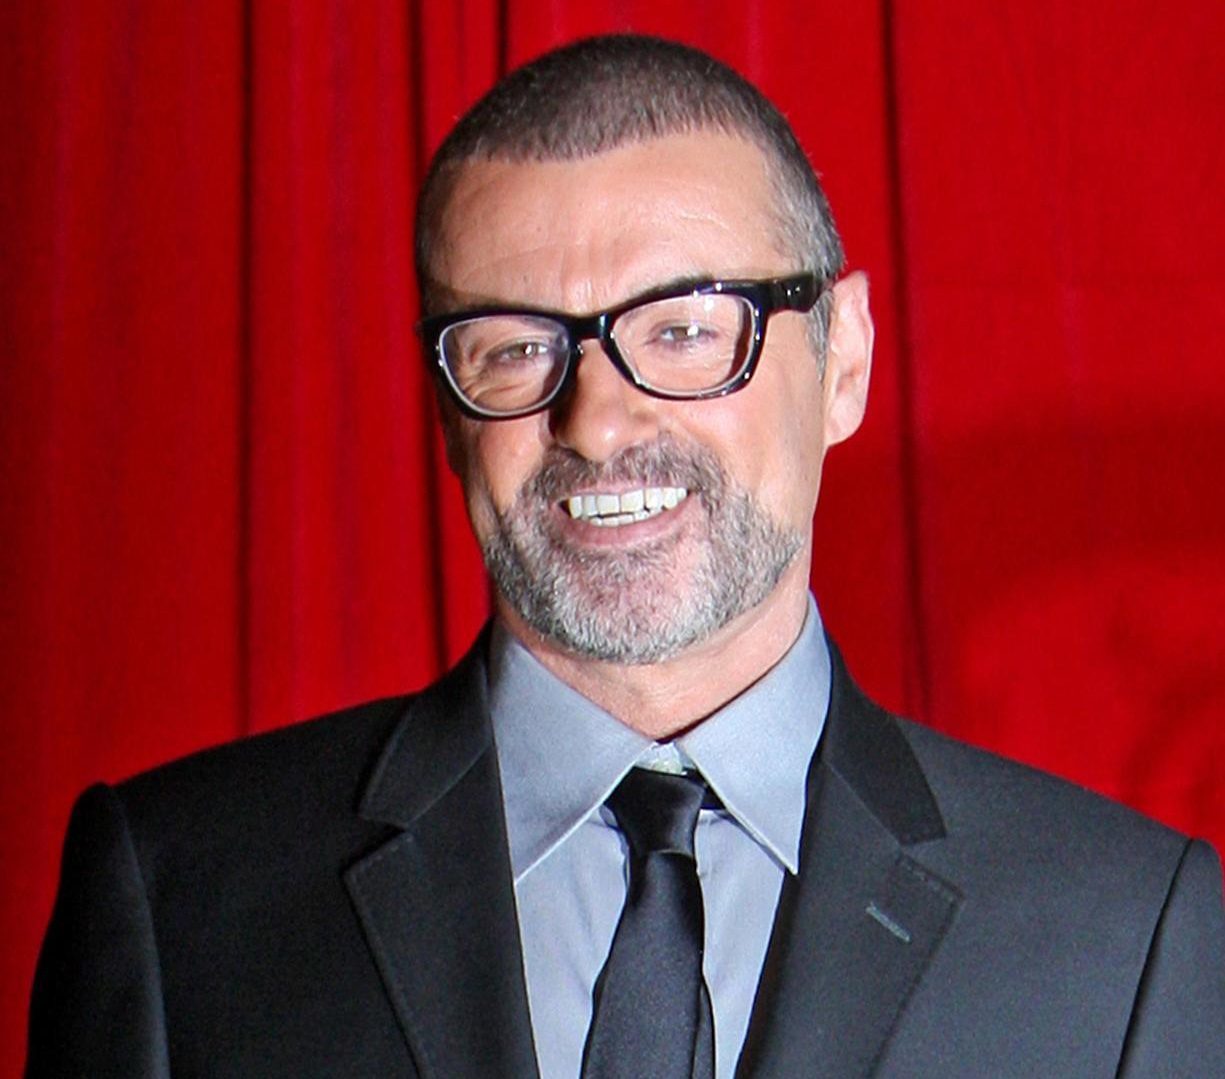 George Michael, who died of natural causes - dilated cardiomyopathy with myocarditis and fatty liver - Darren Salter, senior coroner for Oxfordshire has said. (Chris Radburn/PA Wire)